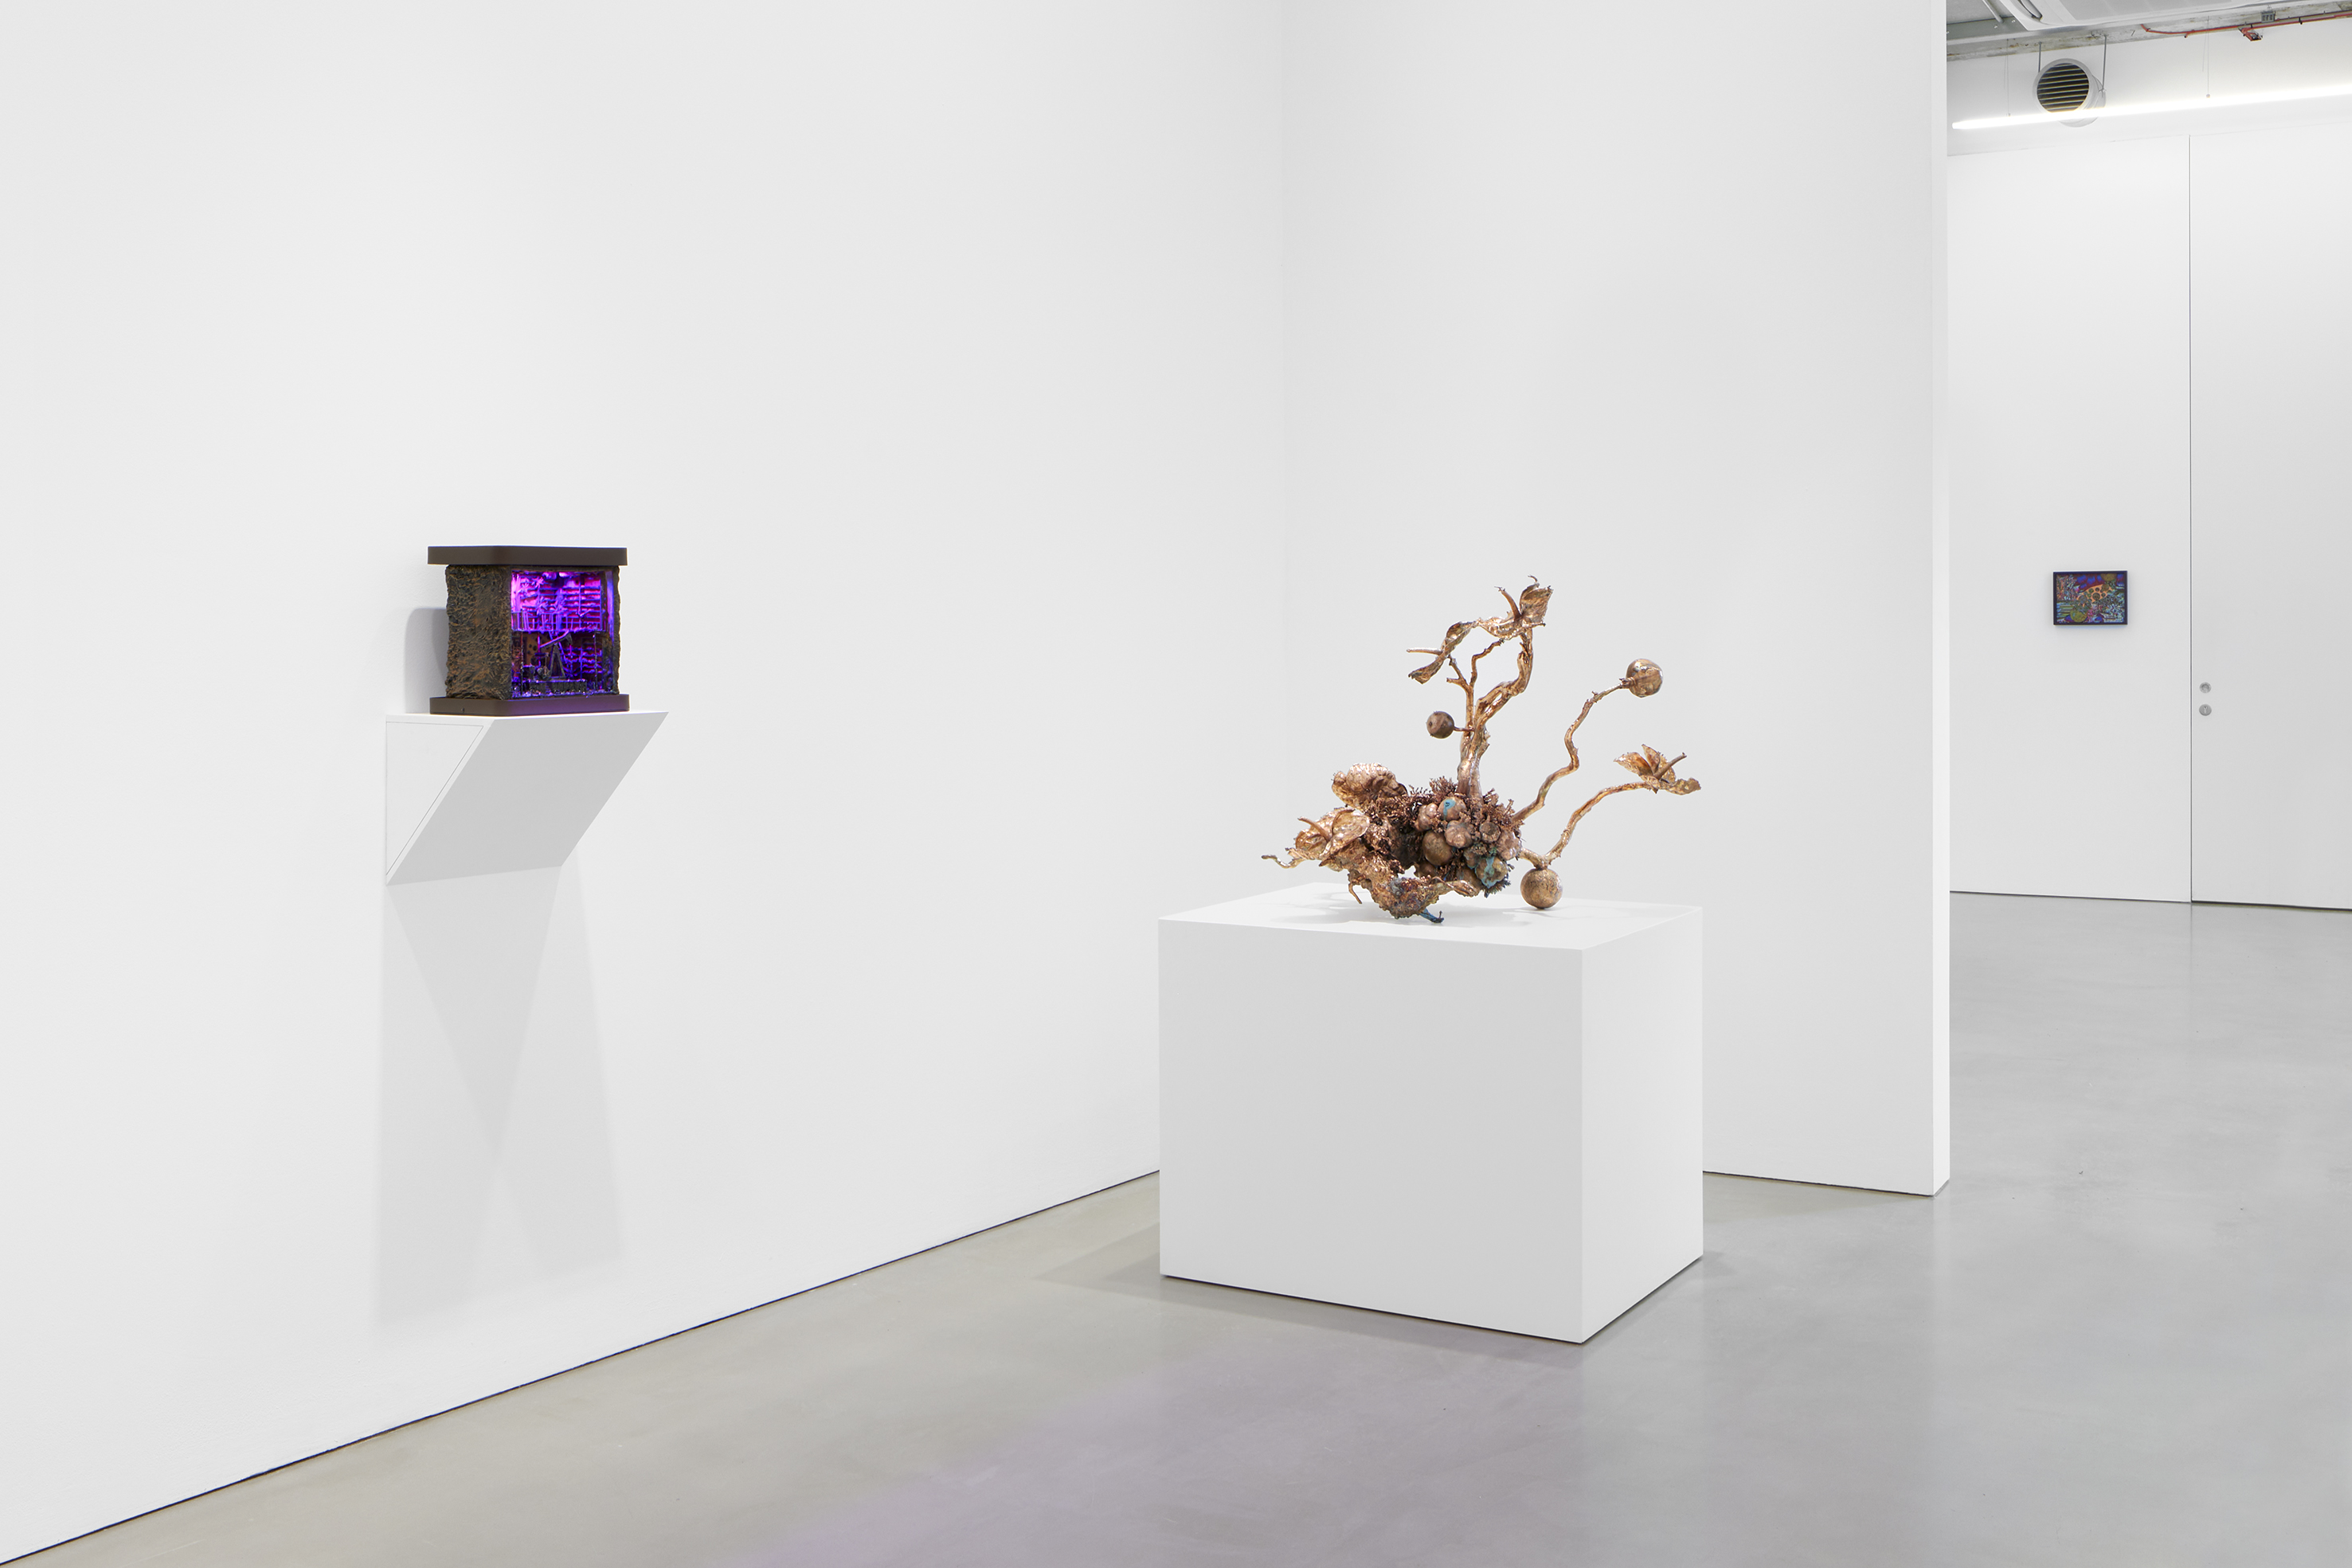 Installation image for Max Hooper Schneider: Twilight at the Earth’s Crust, at Maureen Paley